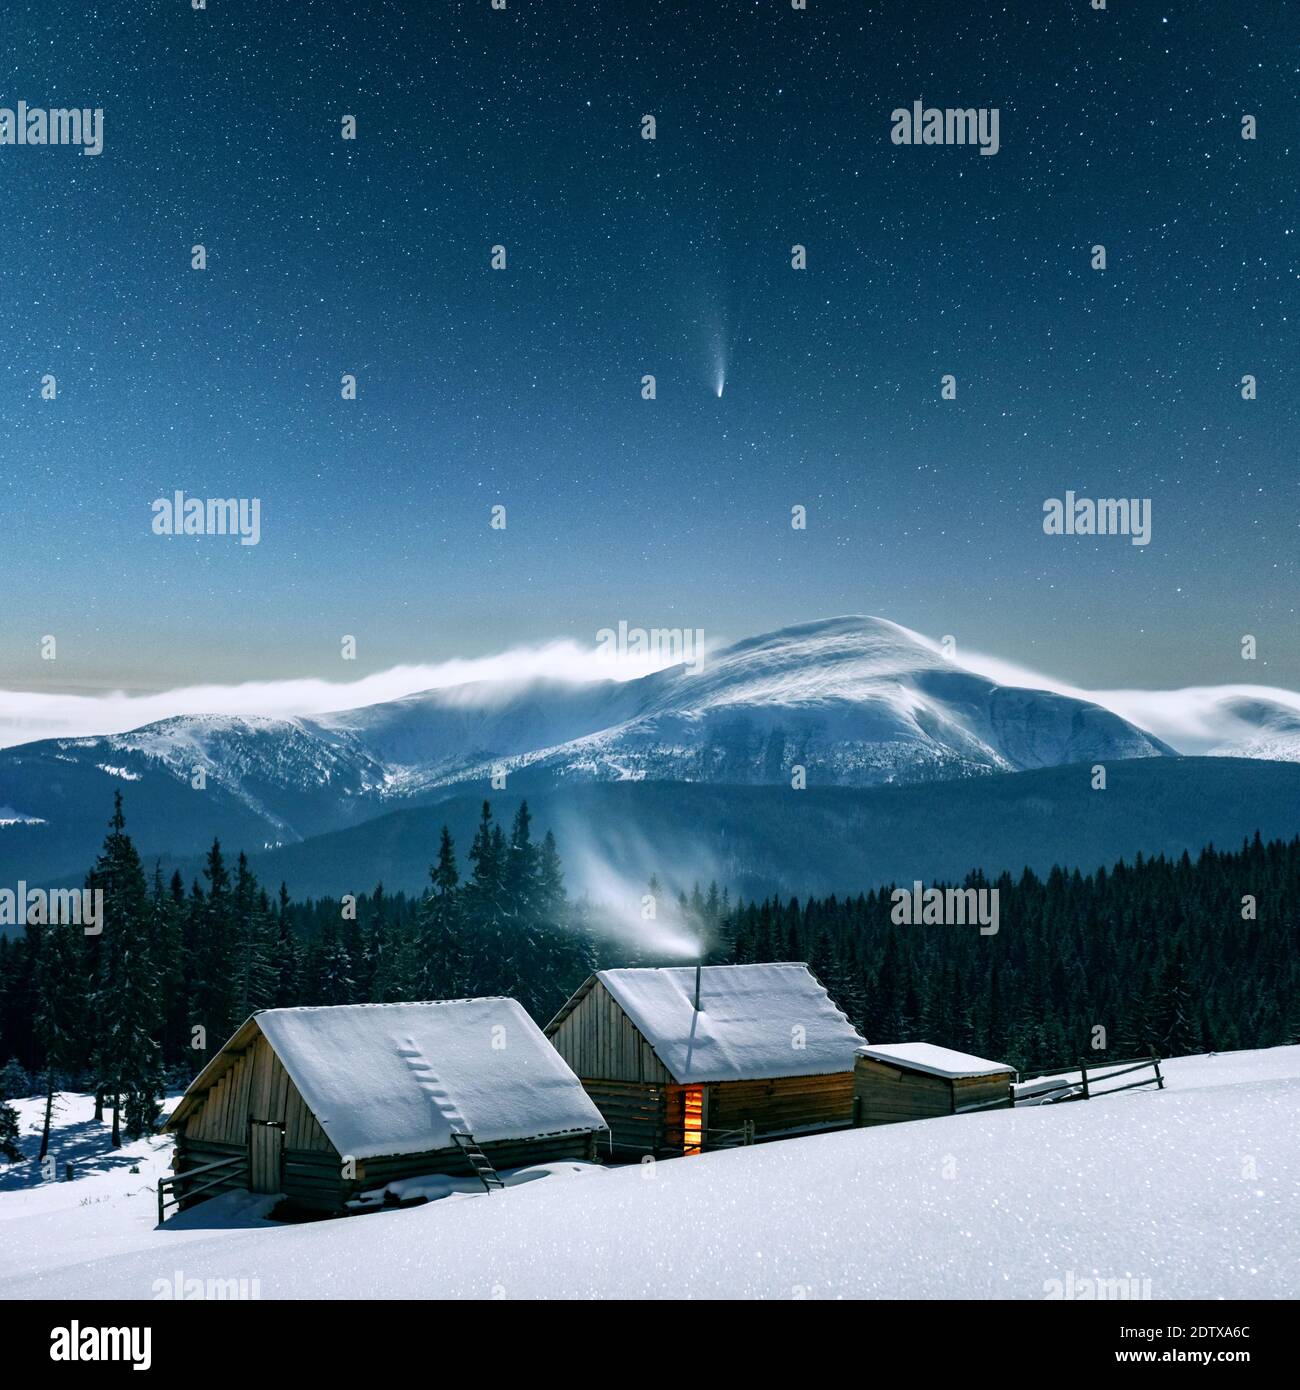 Fantastic winter landscape with wooden house in snowy mountains. Starry sky with Milky Way and snow covered hut. Christmas holiday and winter vacations concept Stock Photo